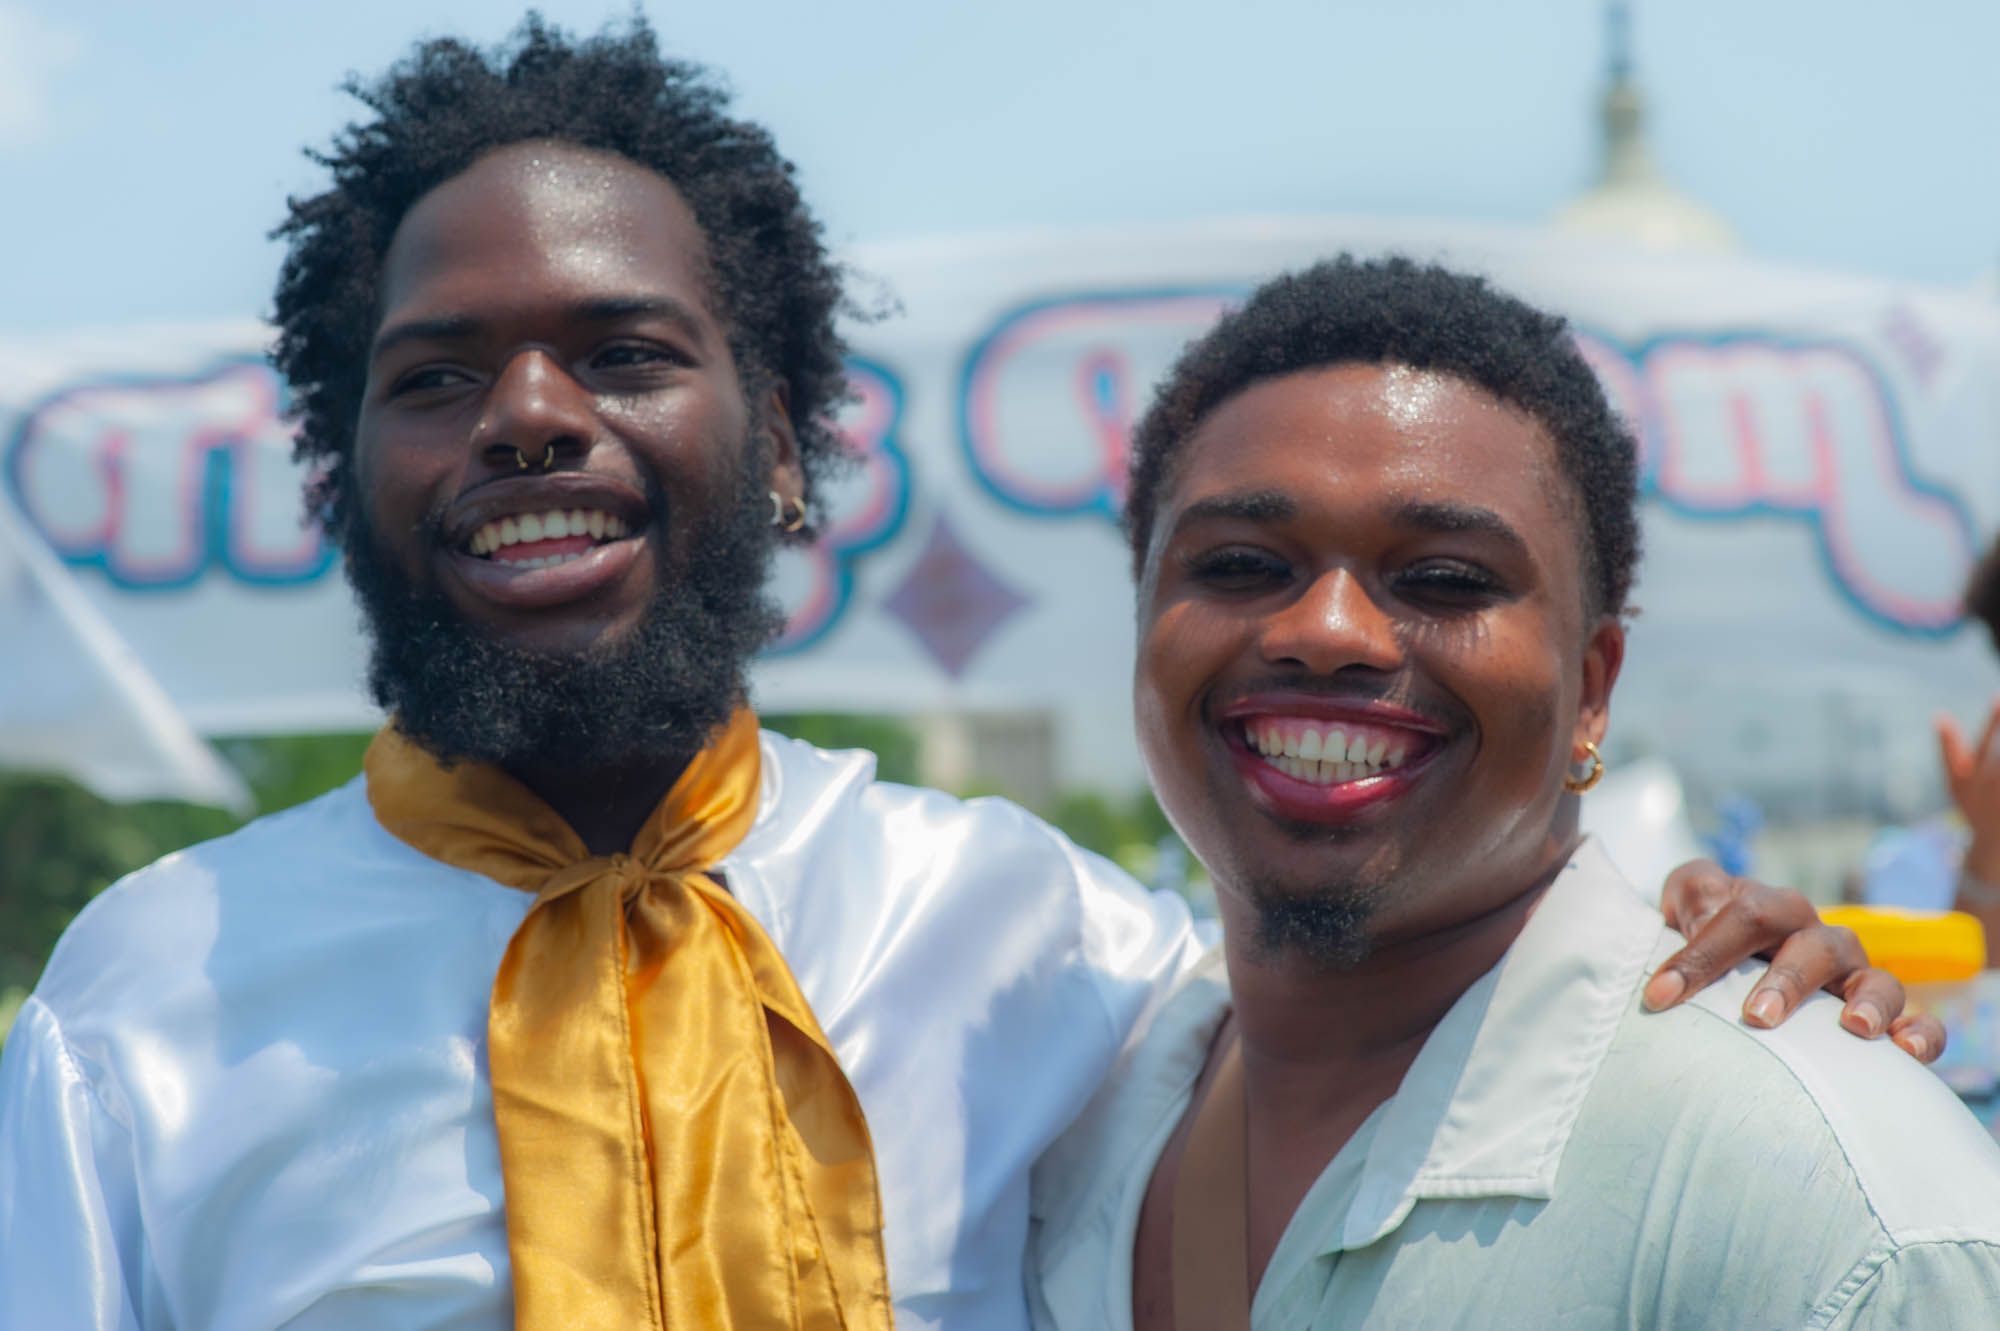 DaQuon Allen, 20, and Josh Baker, 26, pose at The Trans Youth Prom in Washington D.C. 